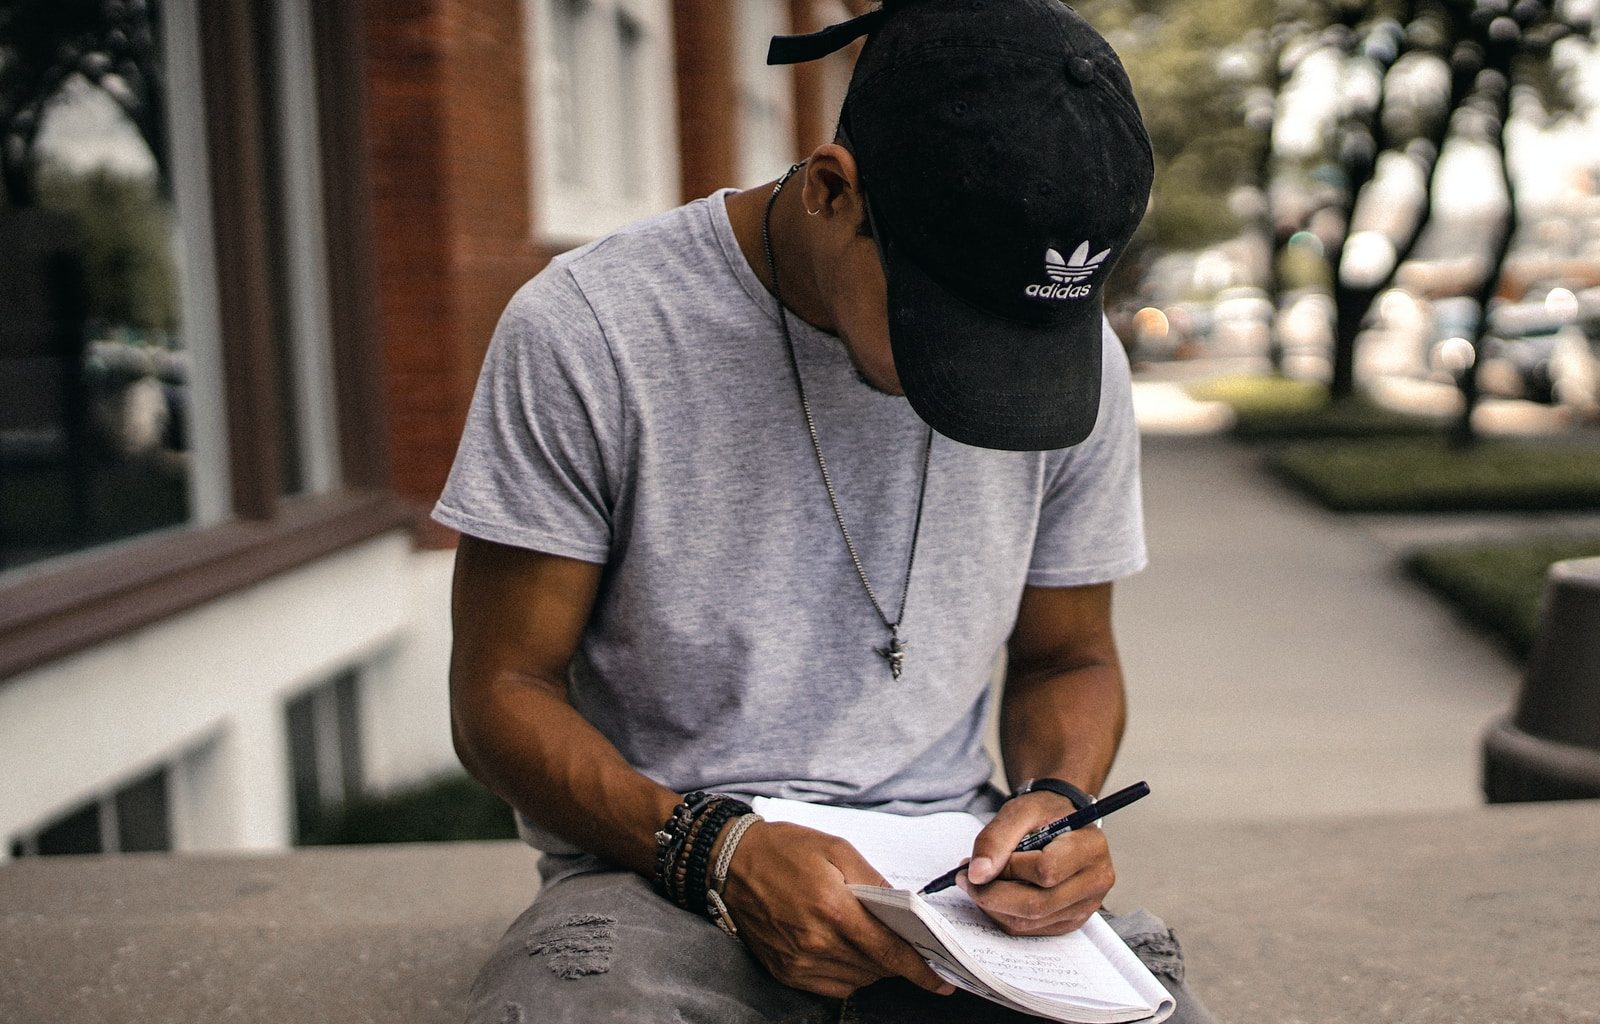 person in black adidas cap sitting on bench writing on notebook